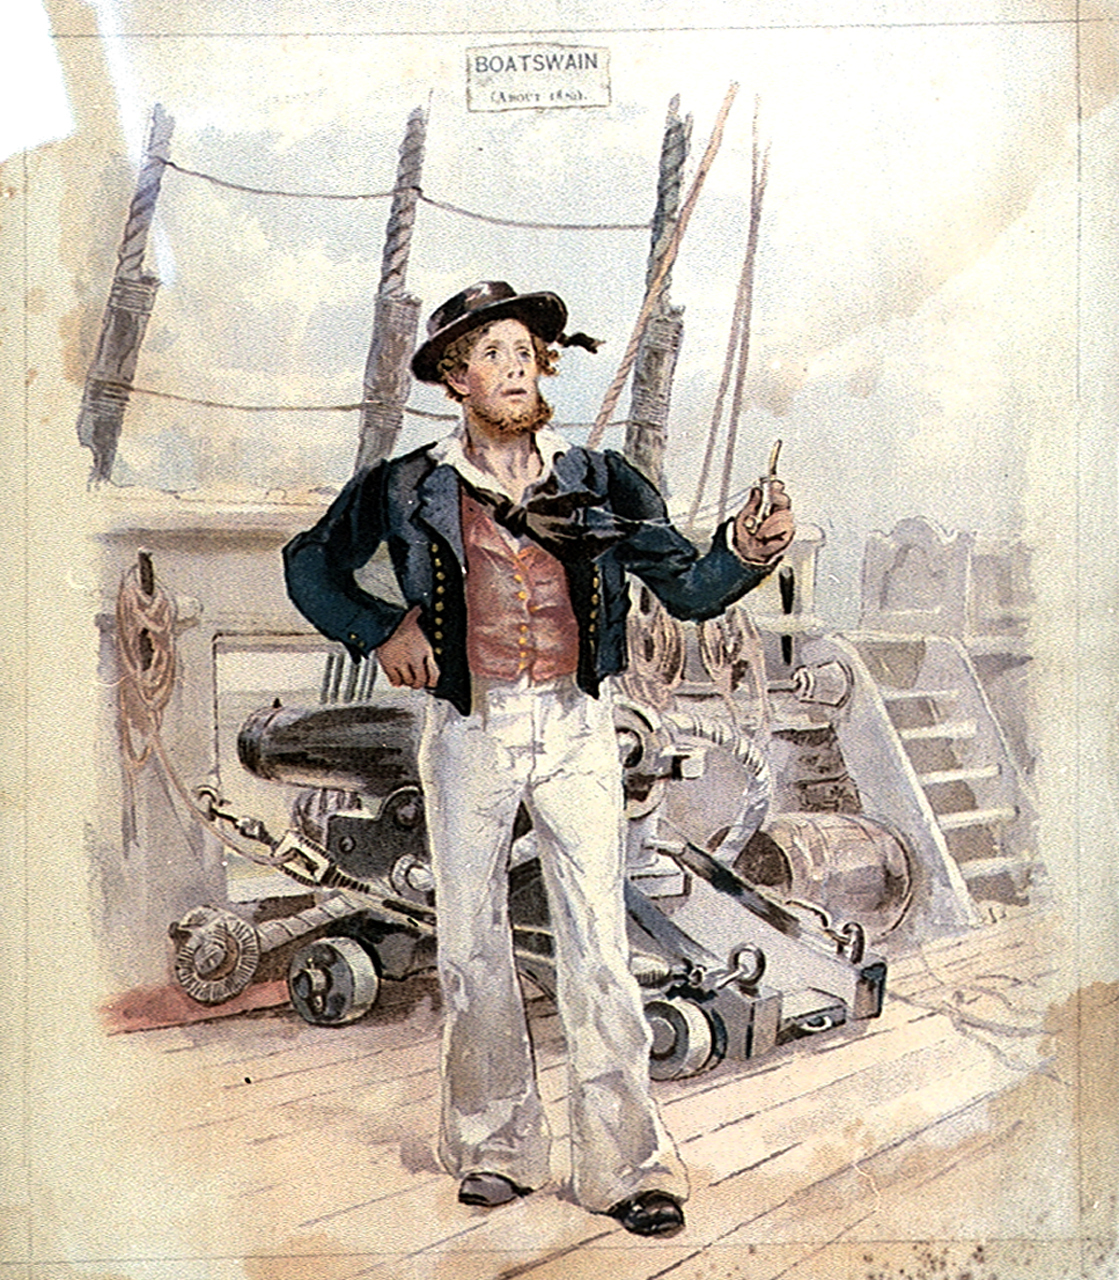 Illustration of a boatswain in the Royal Navy, 1820